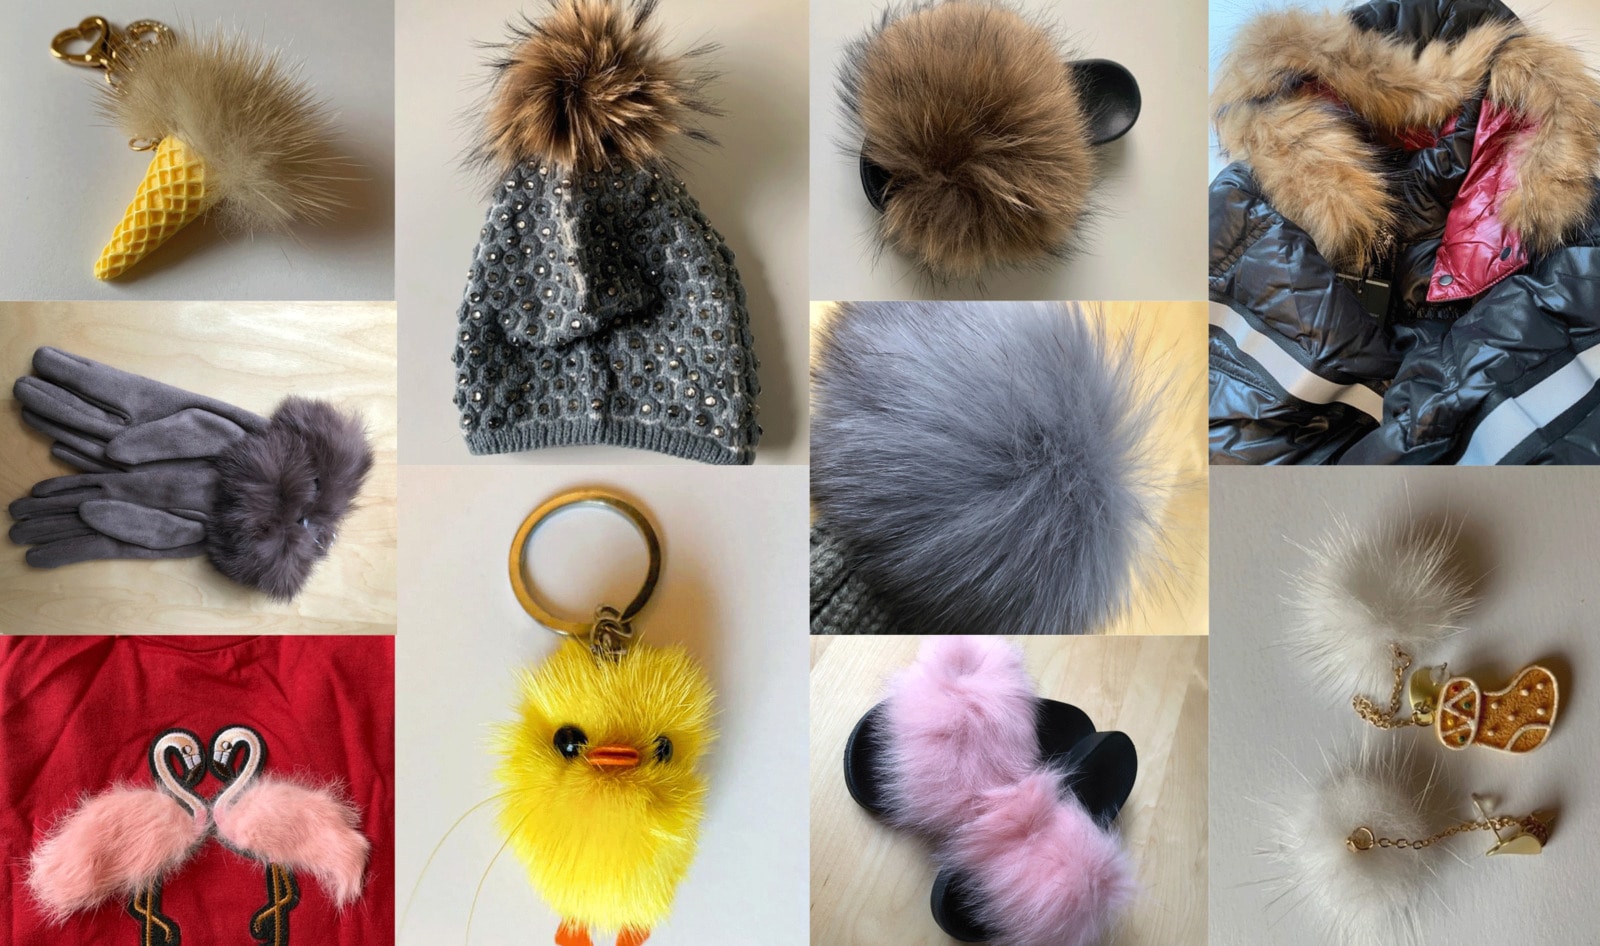 Online Retailers Caught Selling Real Fur Labeled as Faux in UK